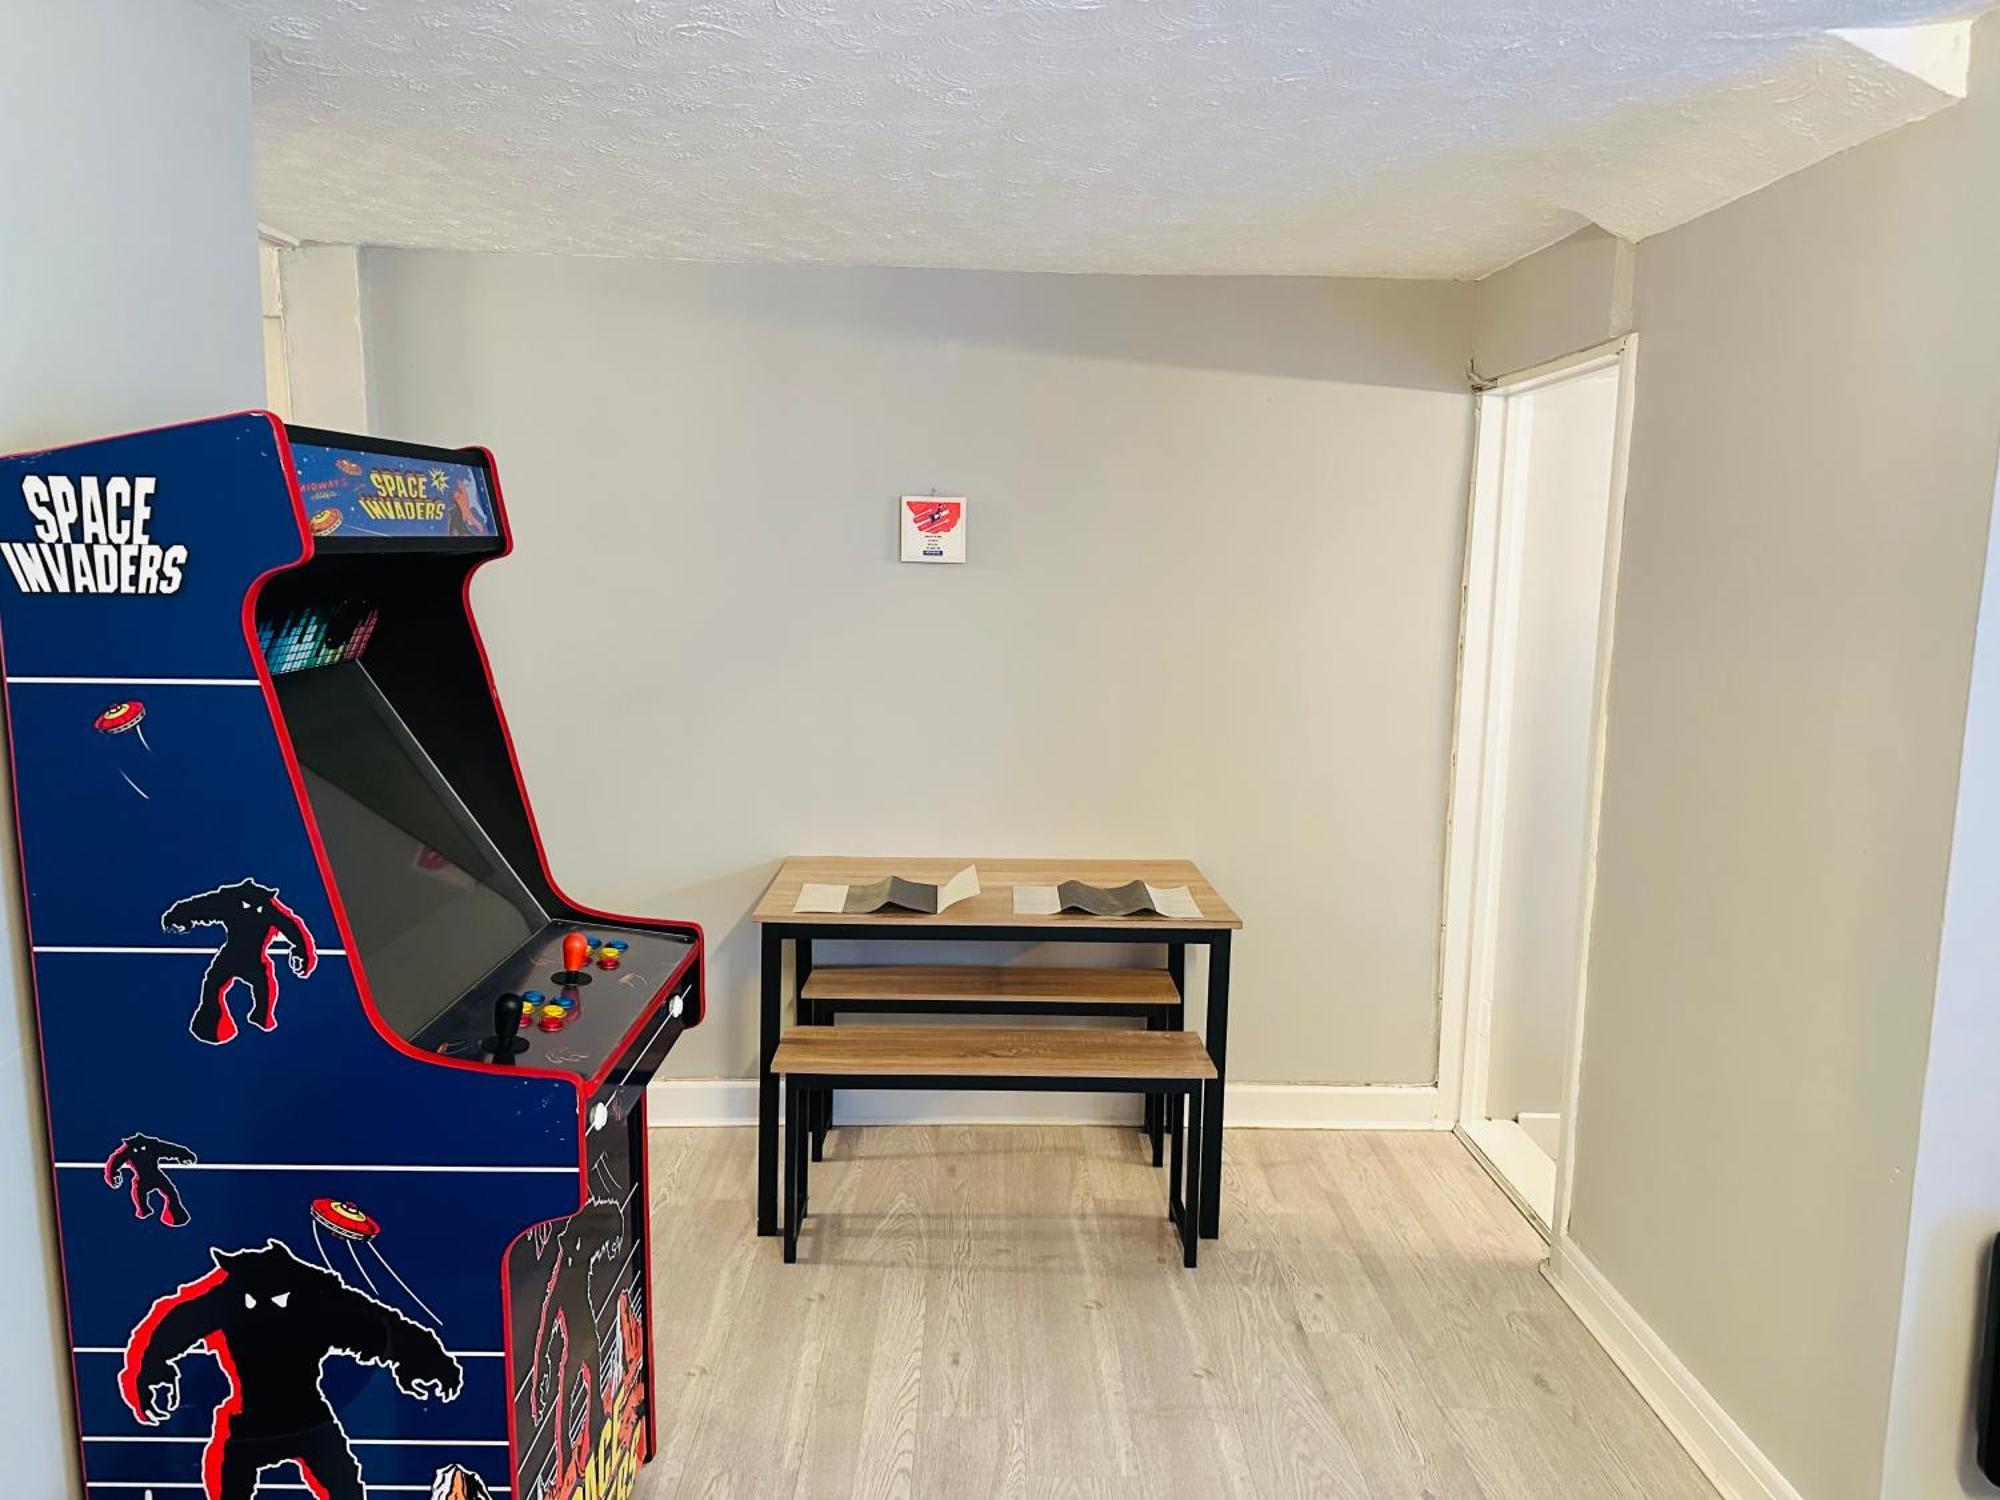 Newly Refurbished - Near Seafront - Retro Games Machine - Central Brighton - 1 Bedroom Apartment Exterior photo